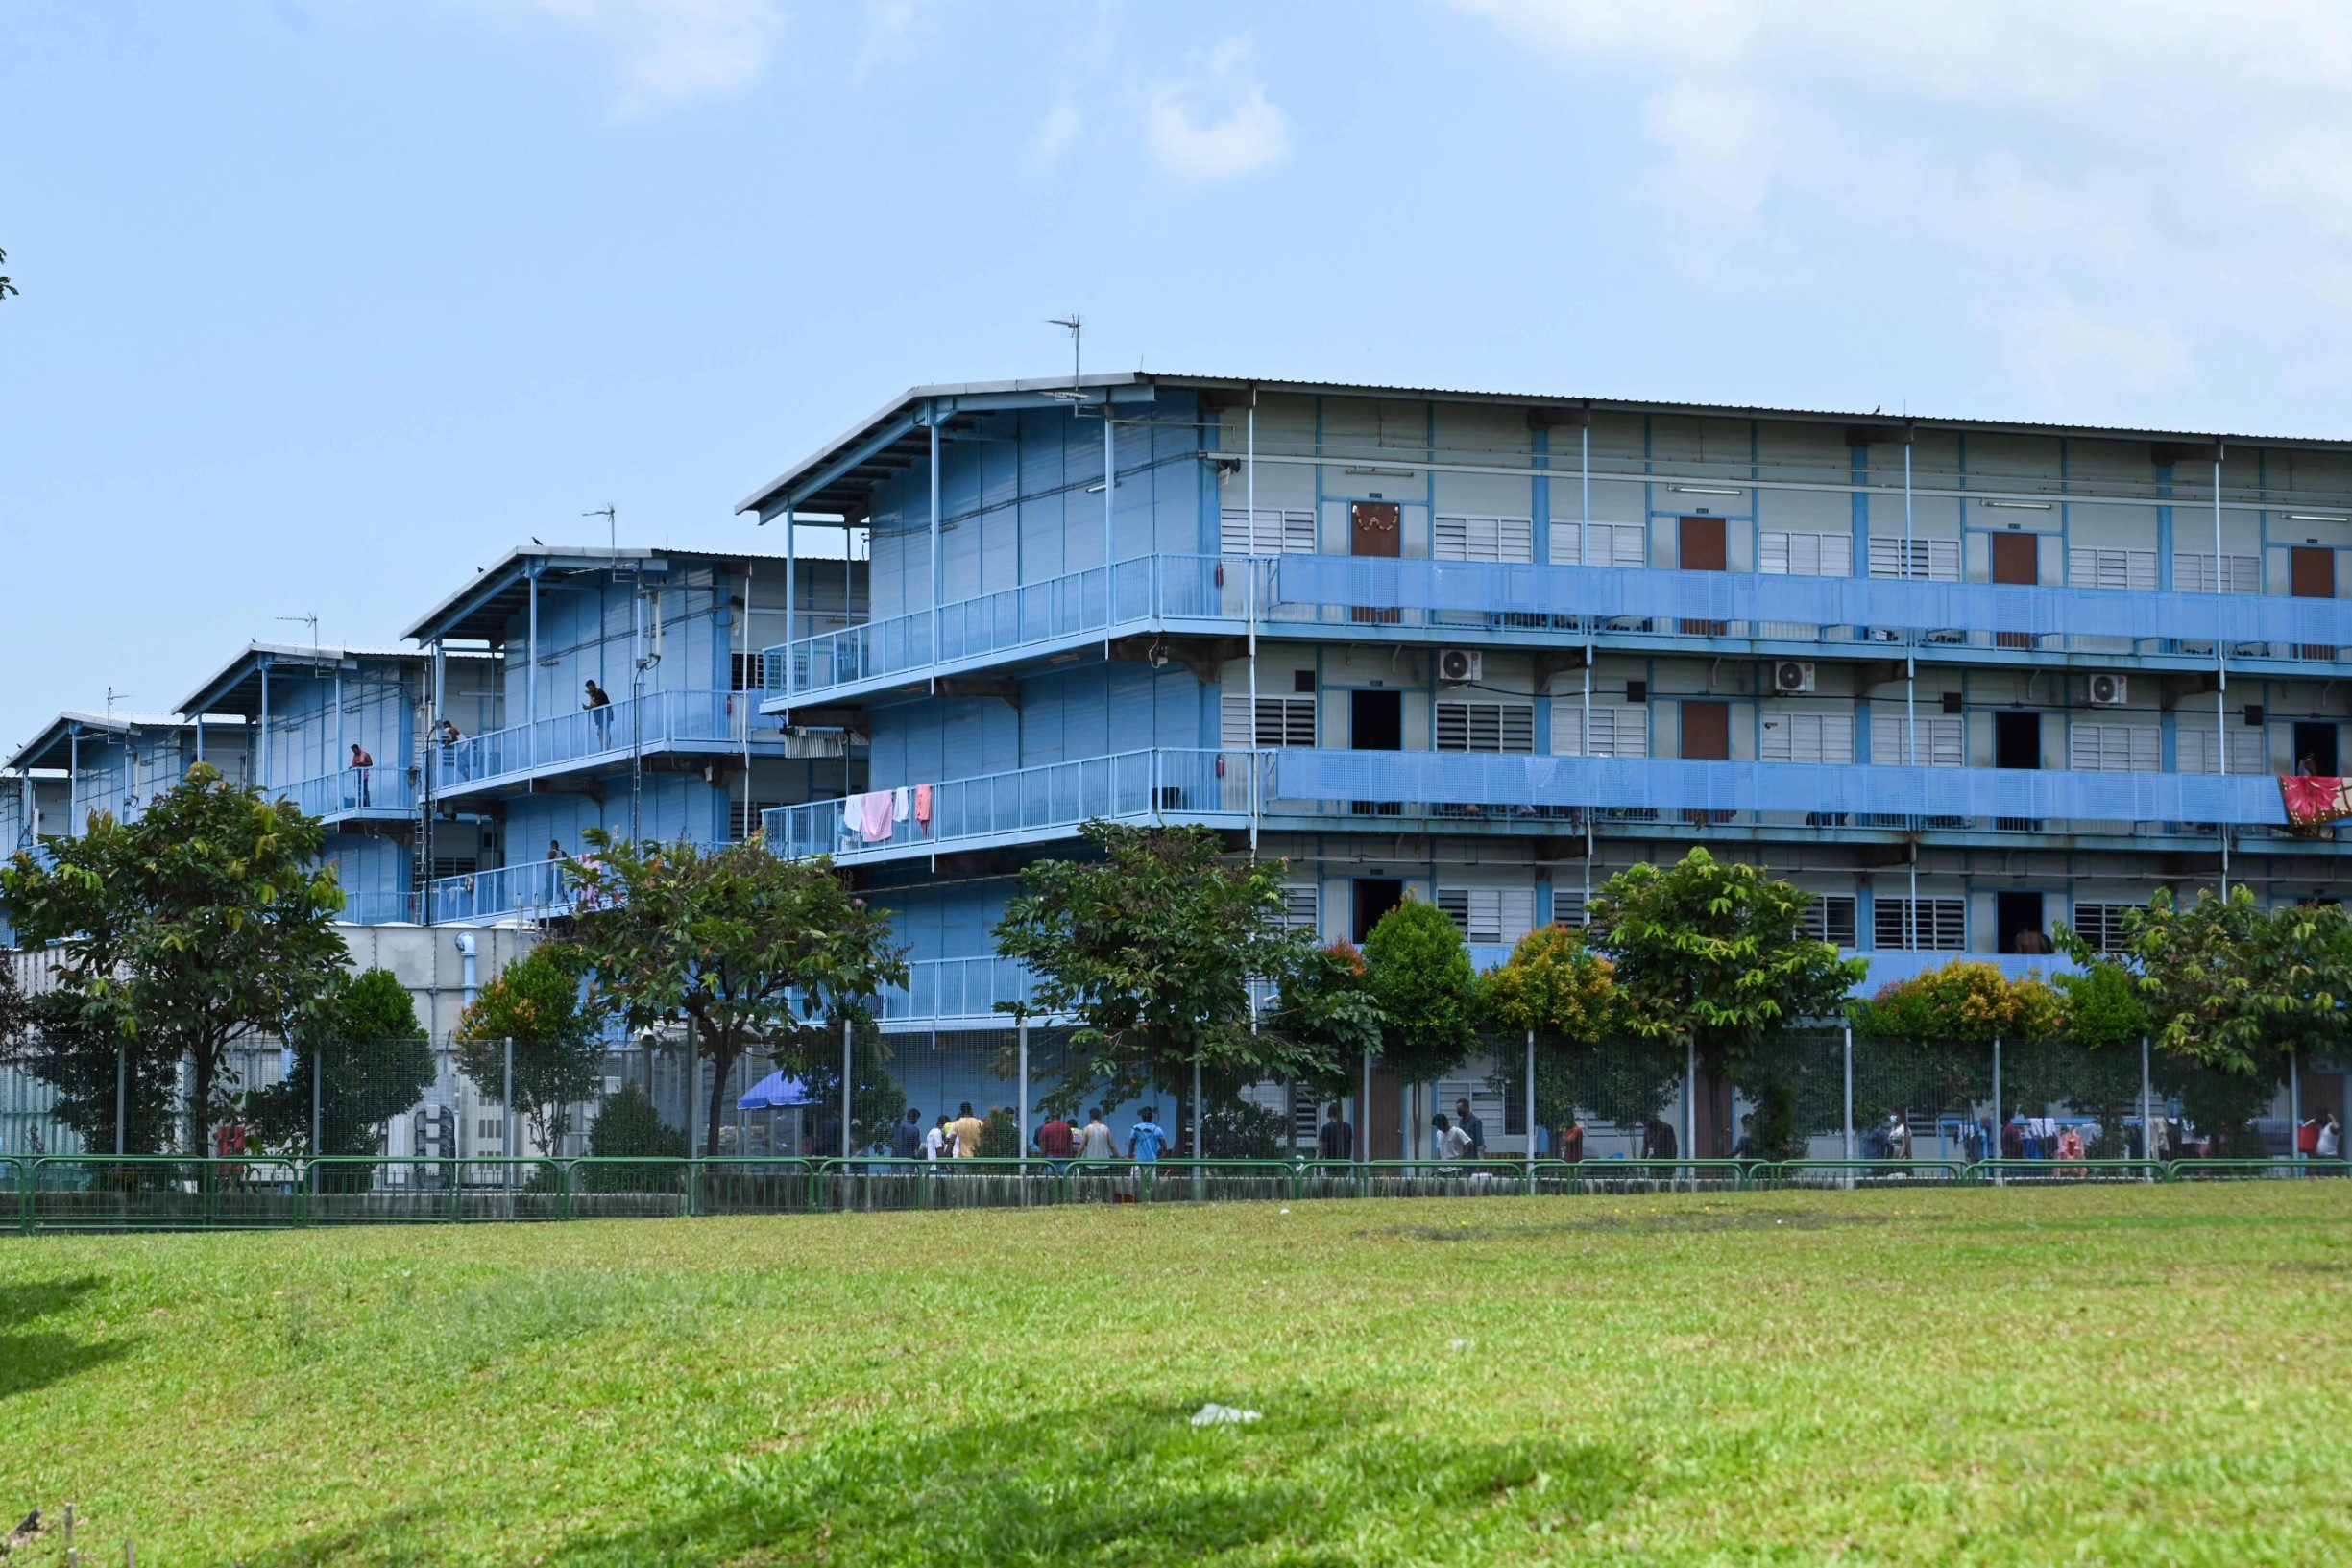 A general view shows the Tuas South foreign workers dormitory that has been placed under government restriction as preventive measure against the spread of the COVID-19 coronavirus in Singapore on April 19, 2020. - Singapore imposed a mandatory stay-home order for migrant workers including in the construction sector for 14 days effective on April 20 due to coronavirus pandemic. (Photo by Roslan RAHMAN / AFP)